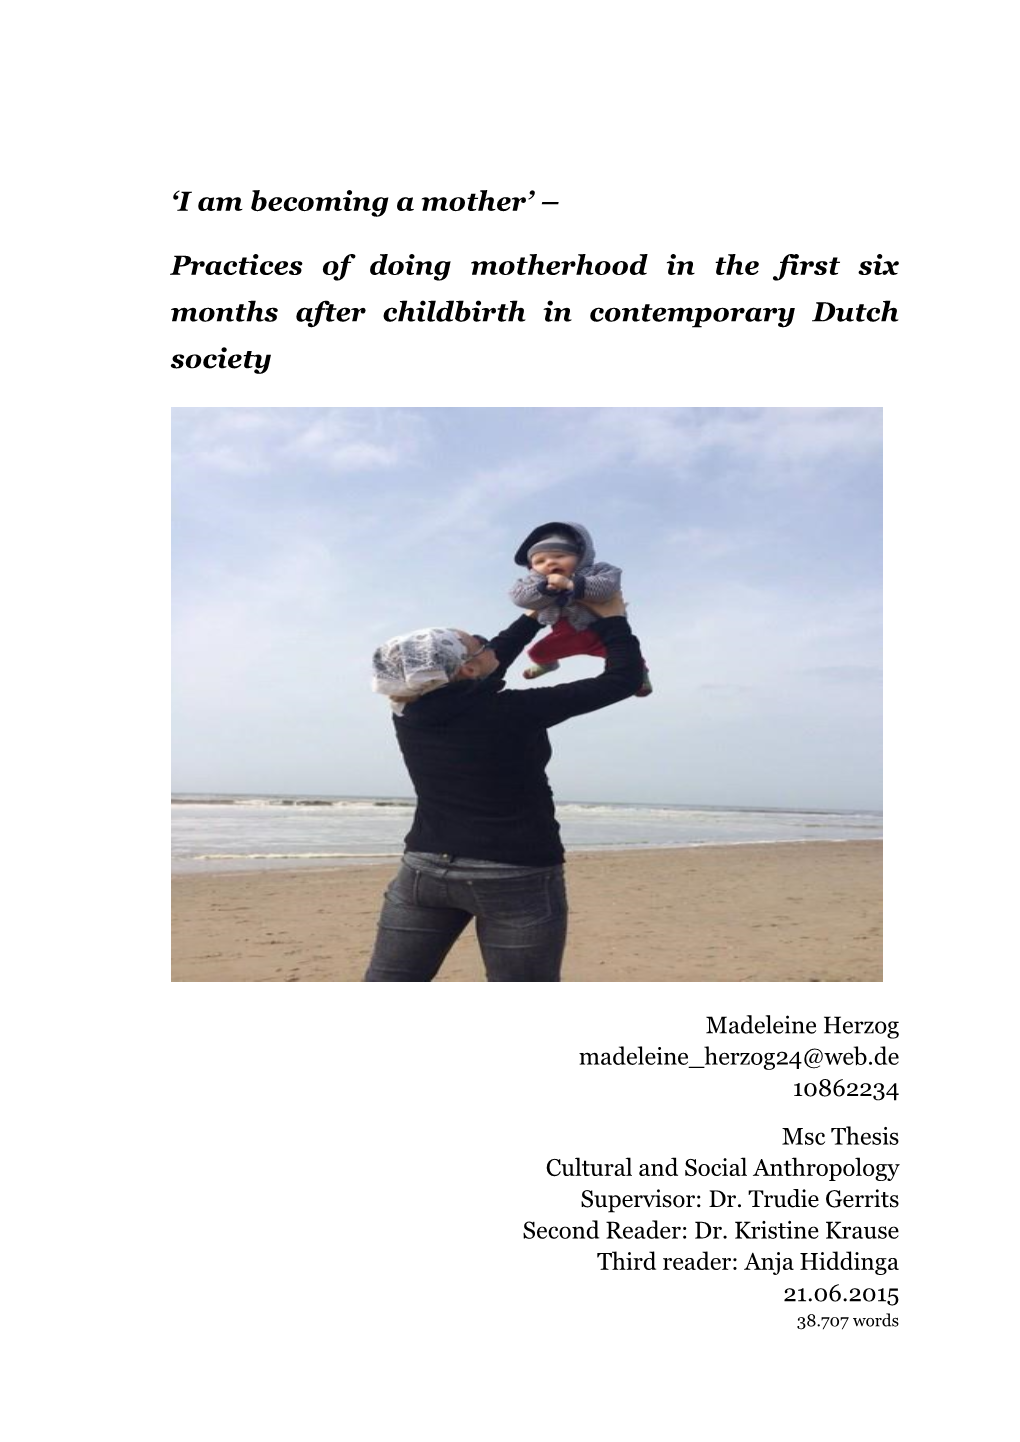 Practices of Doing Motherhood in the First Six Months After Childbirth in Contemporary Dutch Society